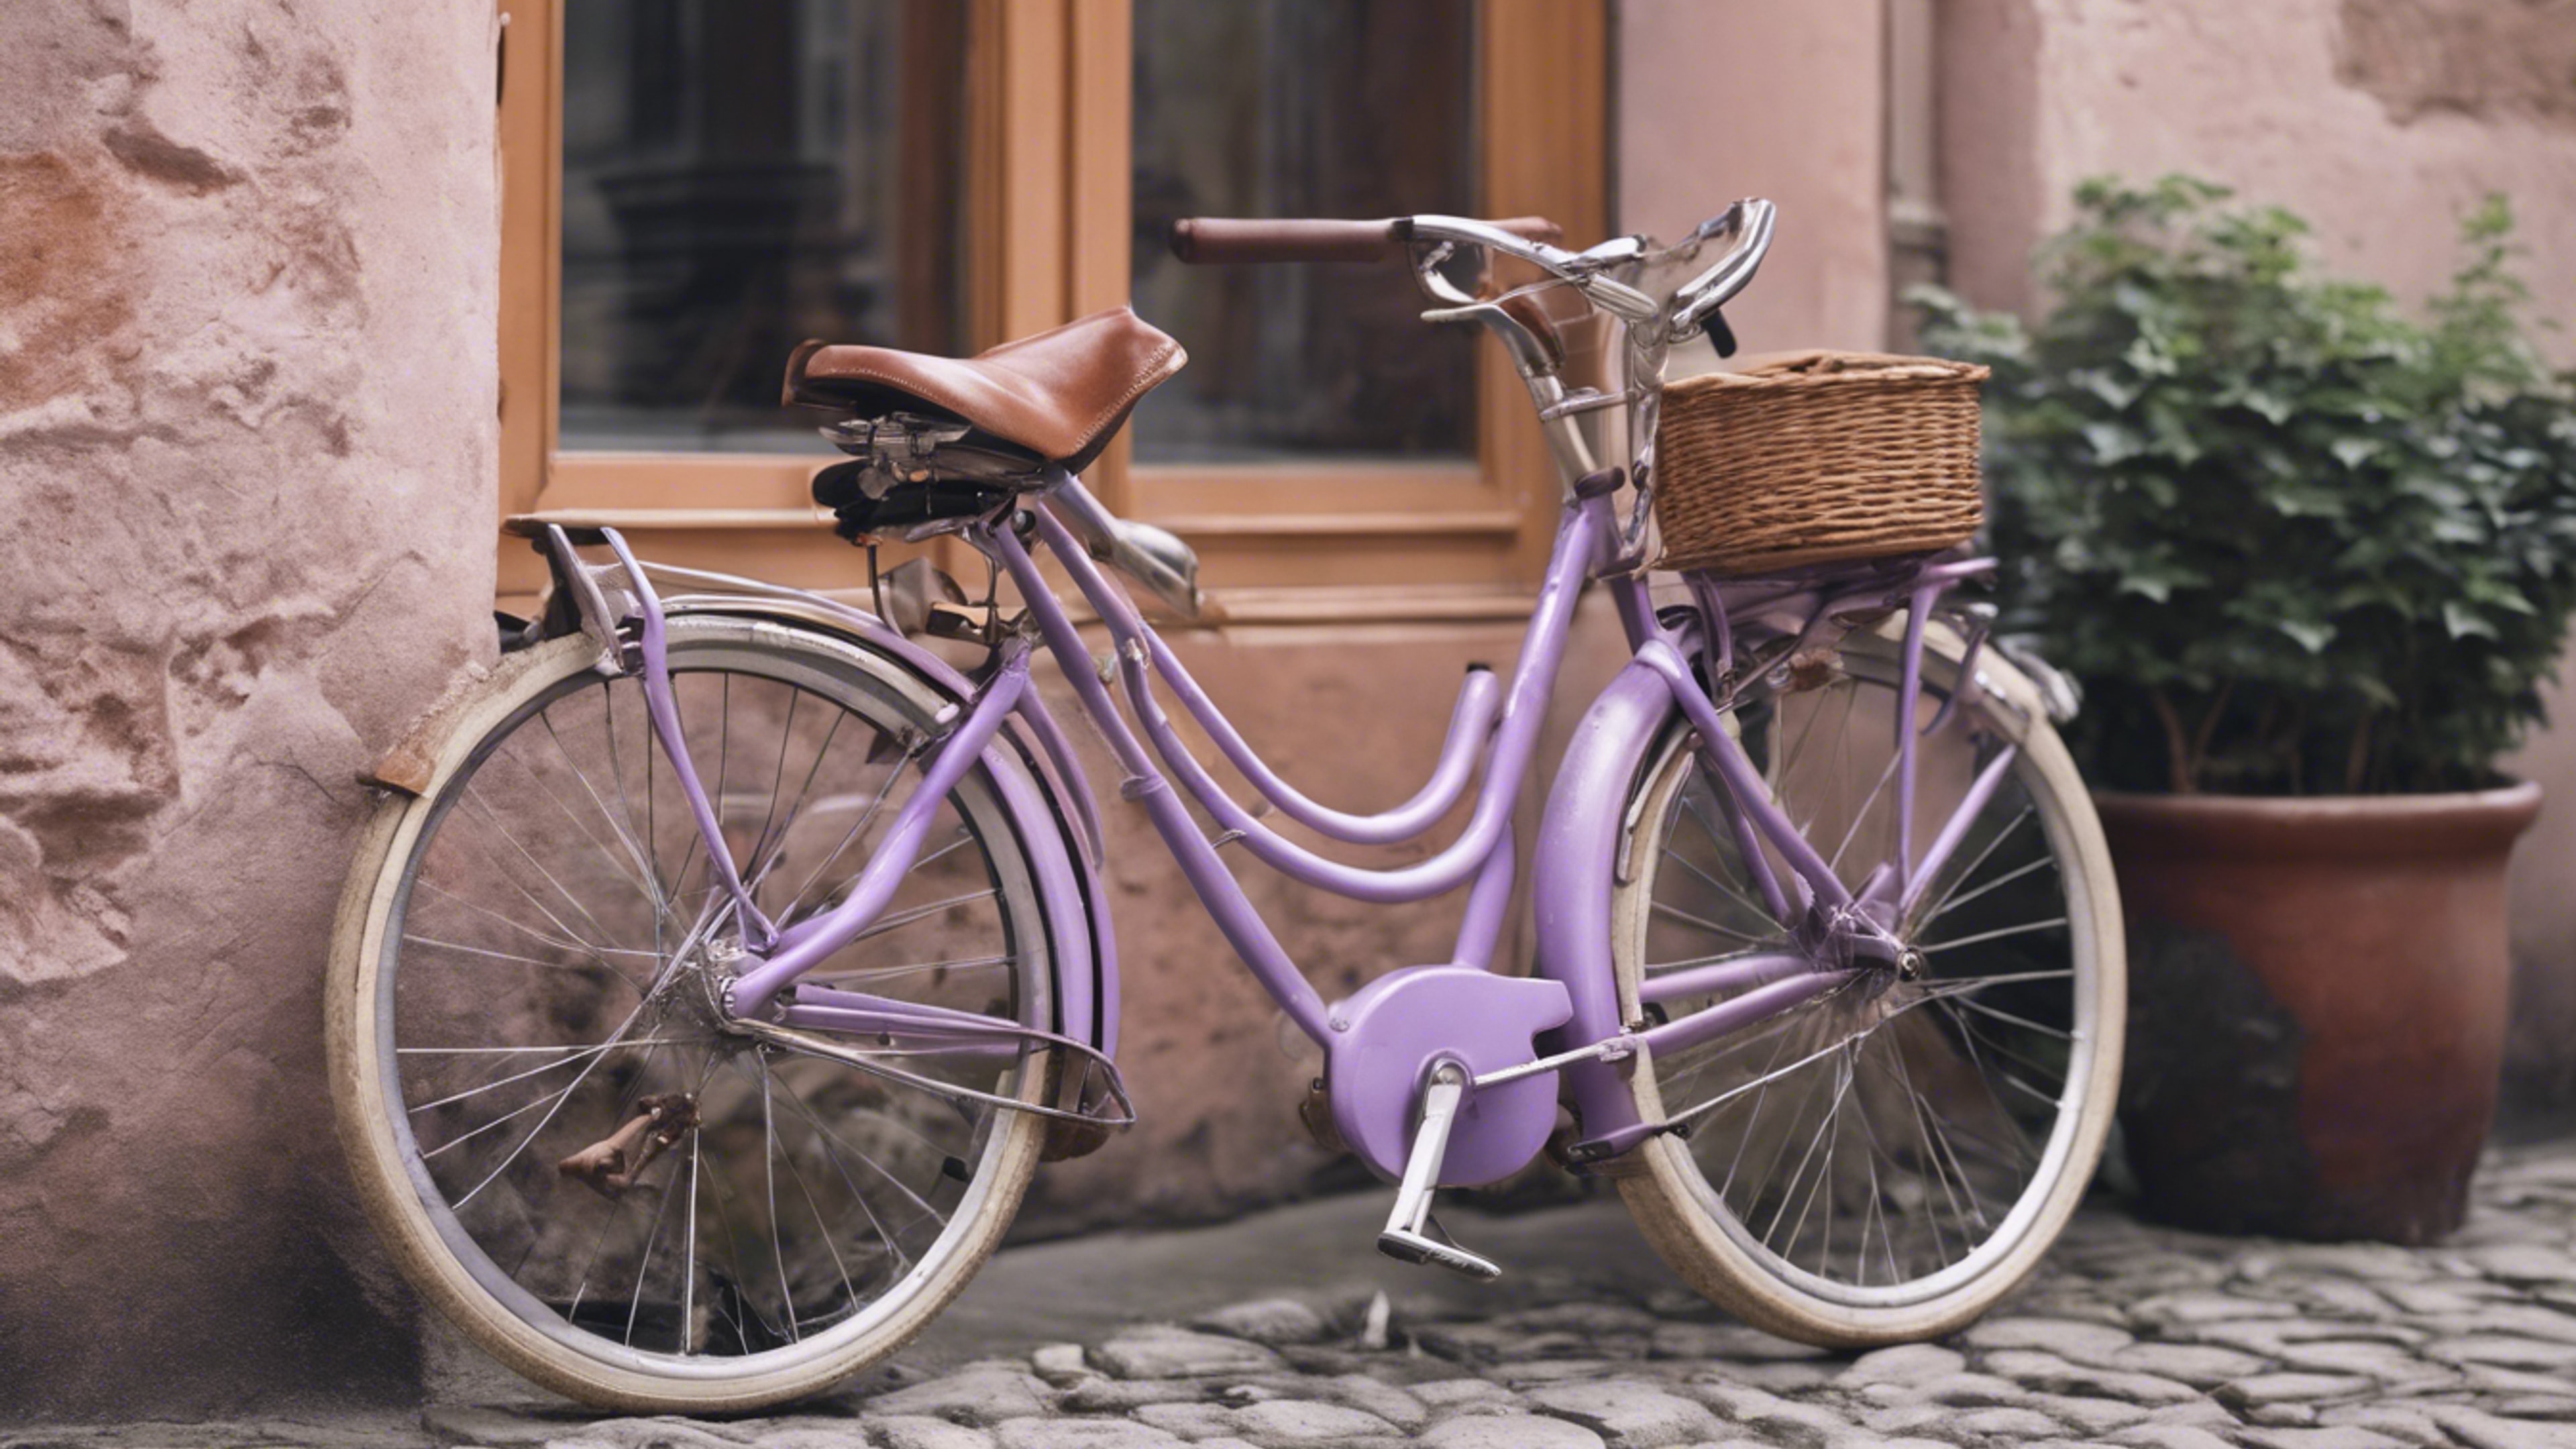 A vintage pastel purple bicycle leaning against a cobblestone wall. Tapet[62be16075cb04ce6b9da]